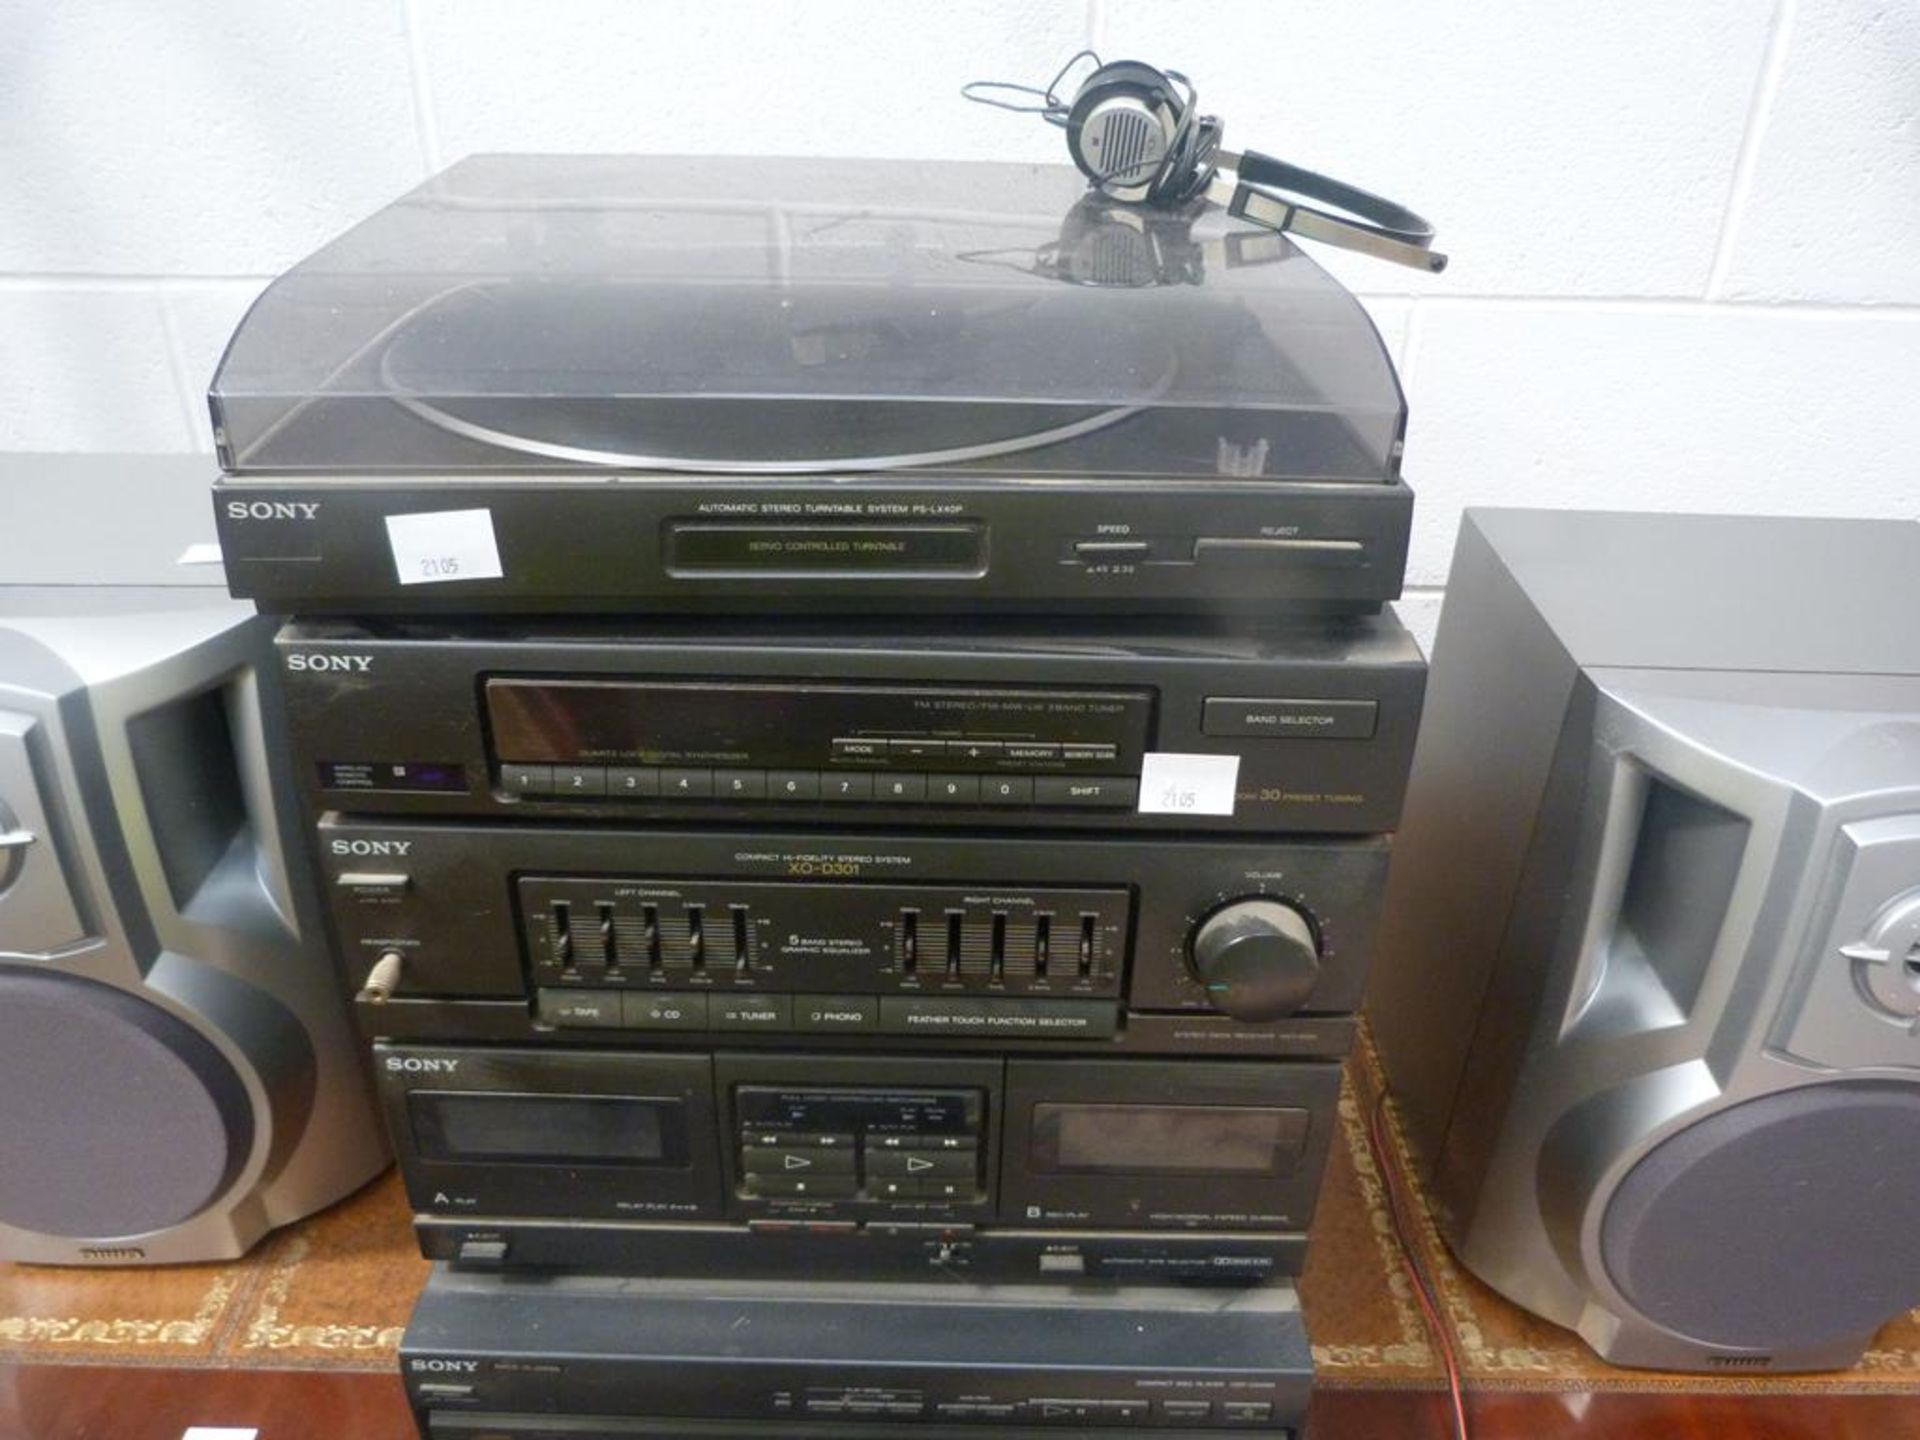 A Sony Stacking Stereo System with 5 Disc Compact CD Player (CDP-C500m), Twin Tape Deck, Stereo - Image 2 of 2